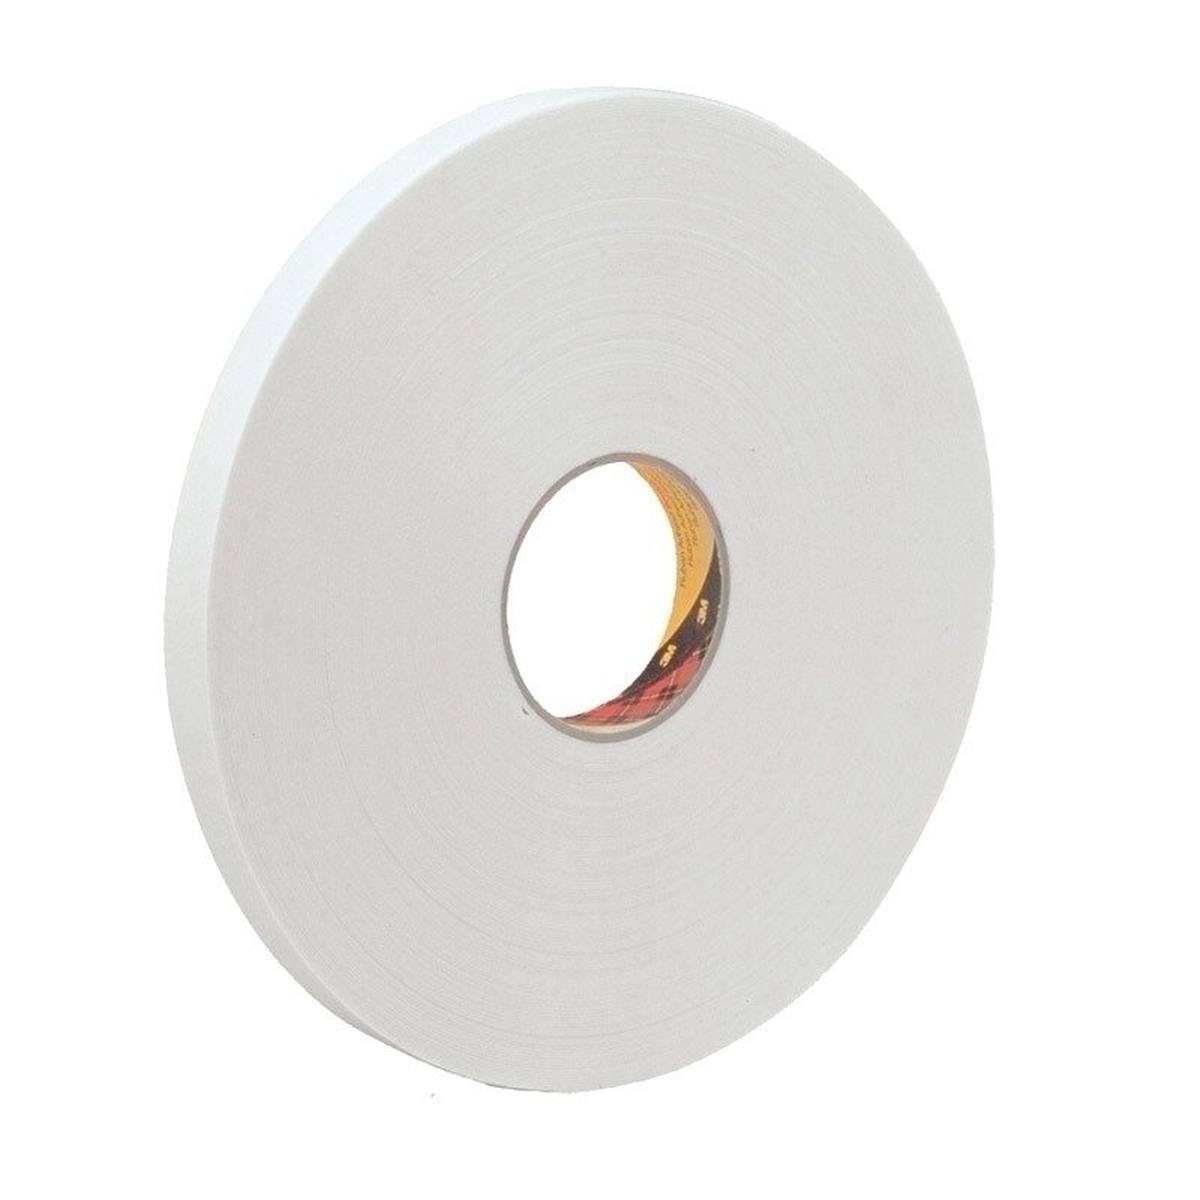 3M PE foam adhesive tape with acrylic adhesive 9539, white, 19 mm x 66 m, 0.8 mm